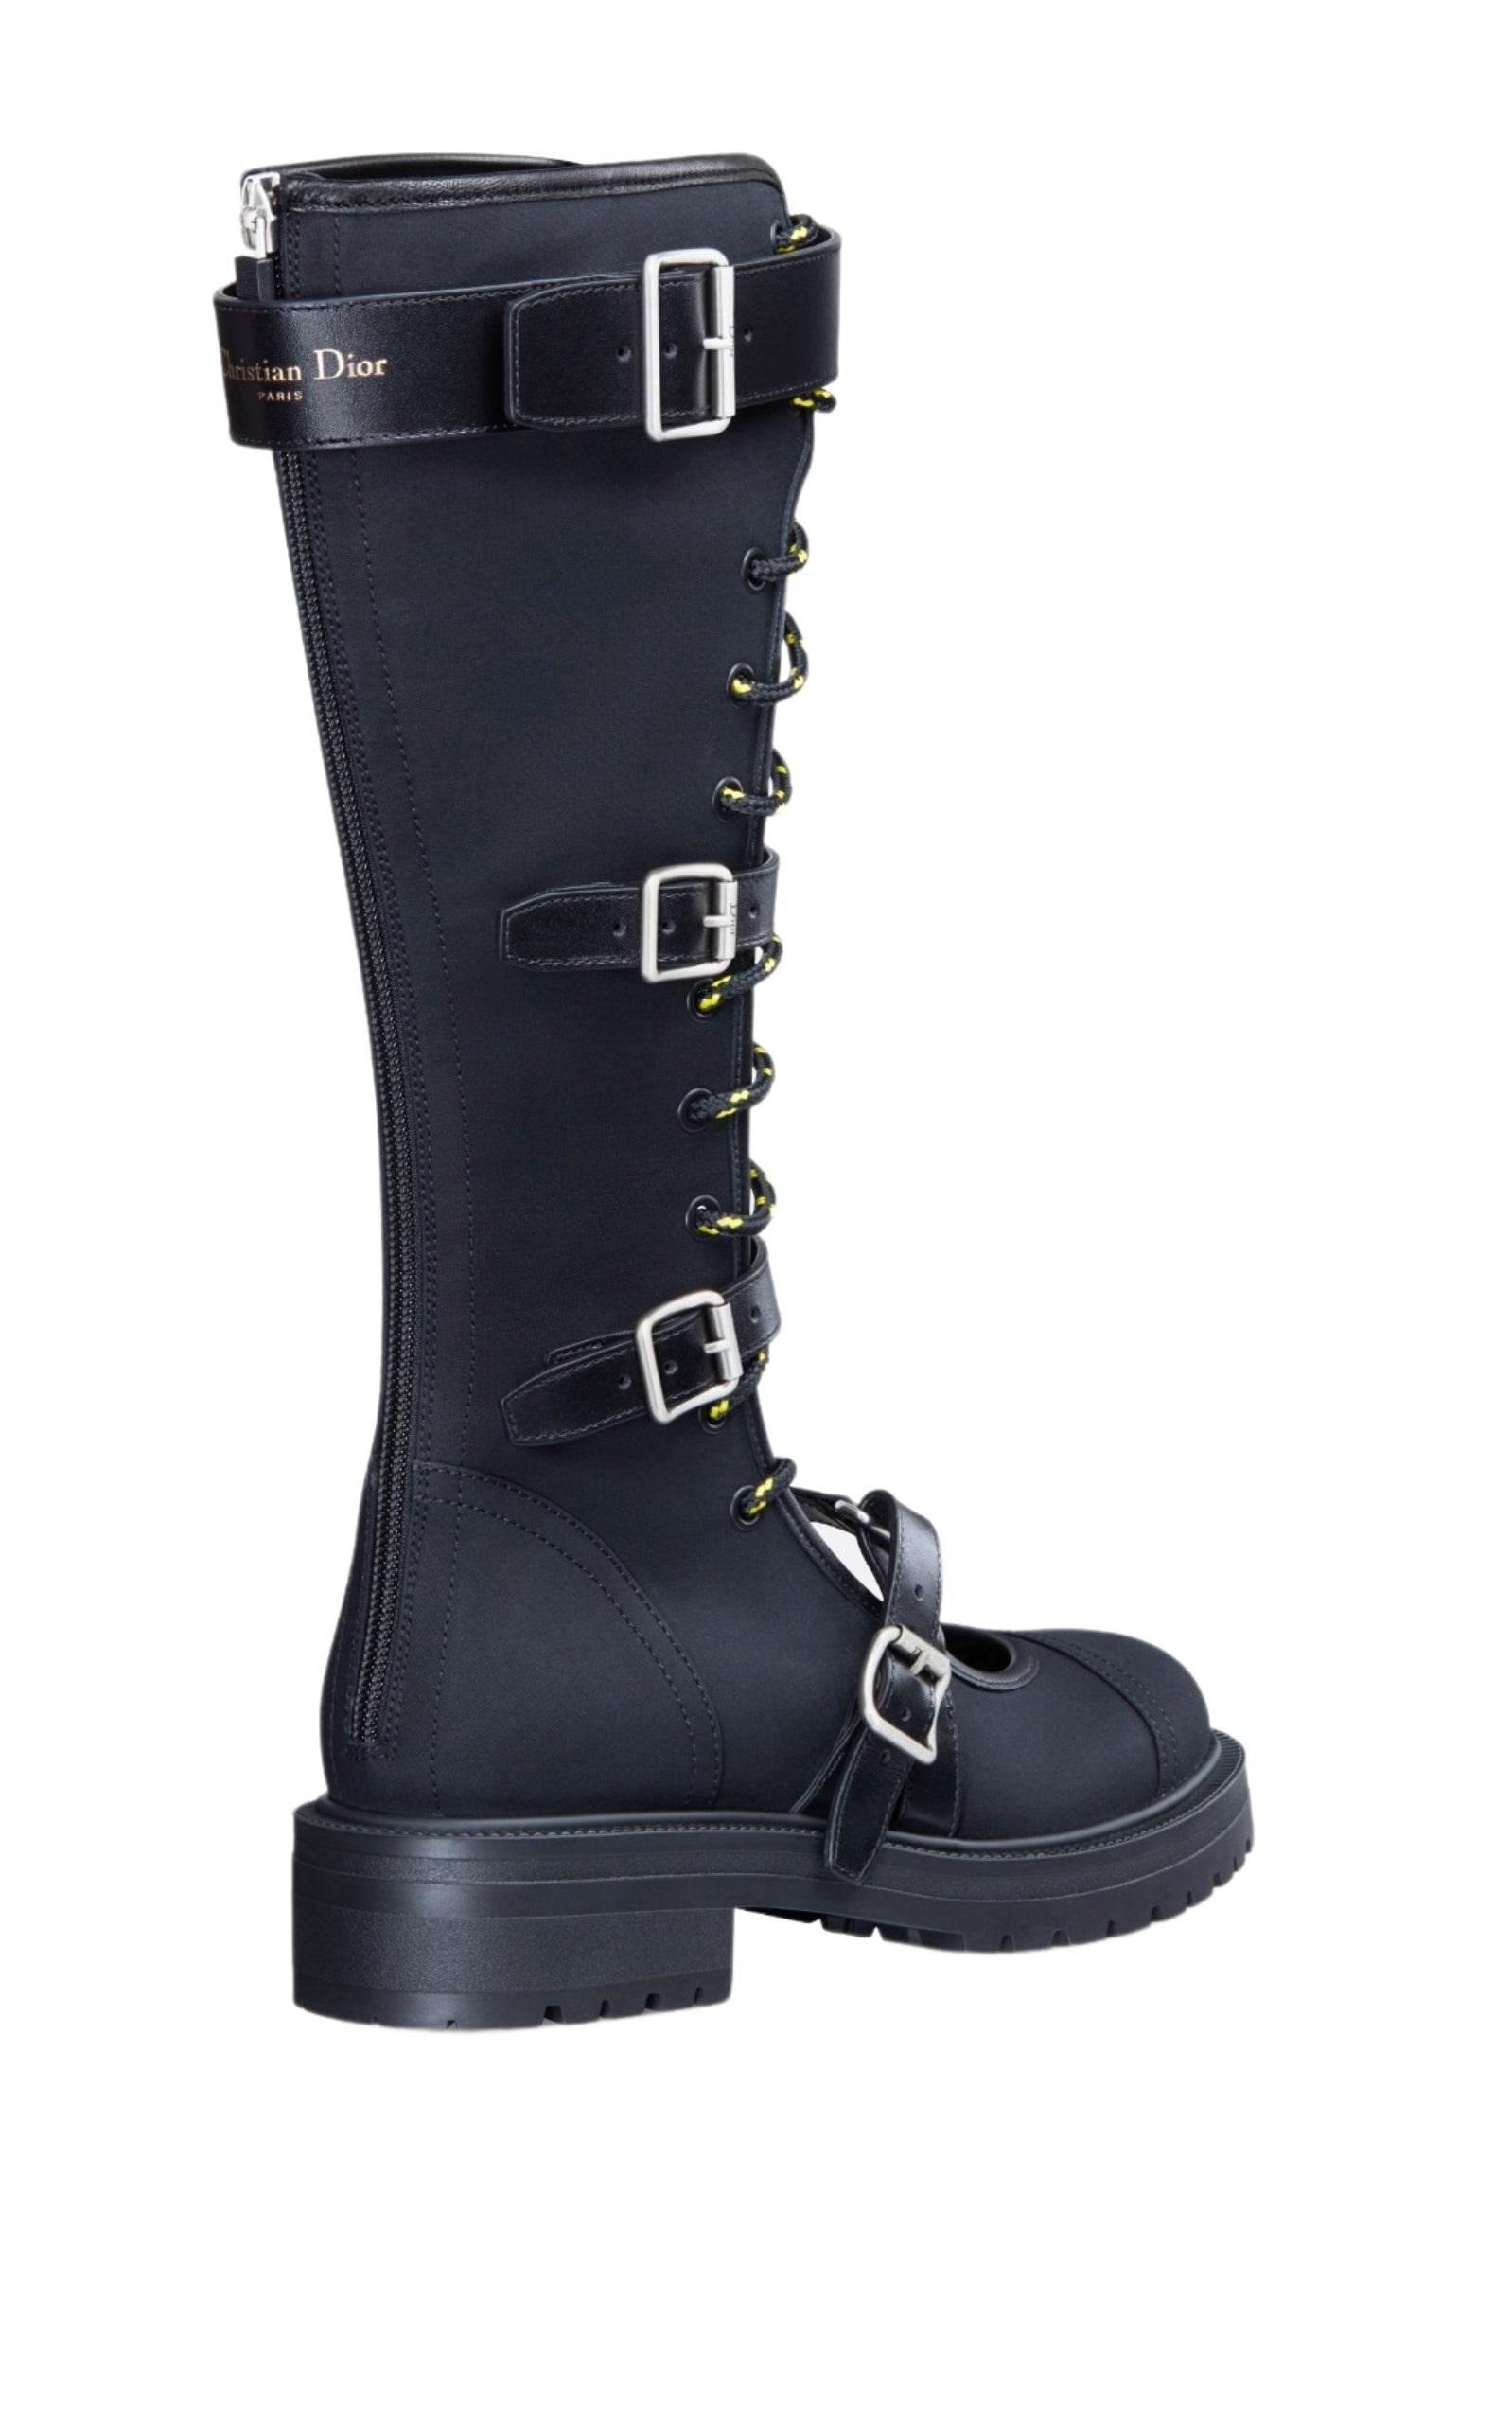 Dioranger Boots in Black Technical Fabric - 3